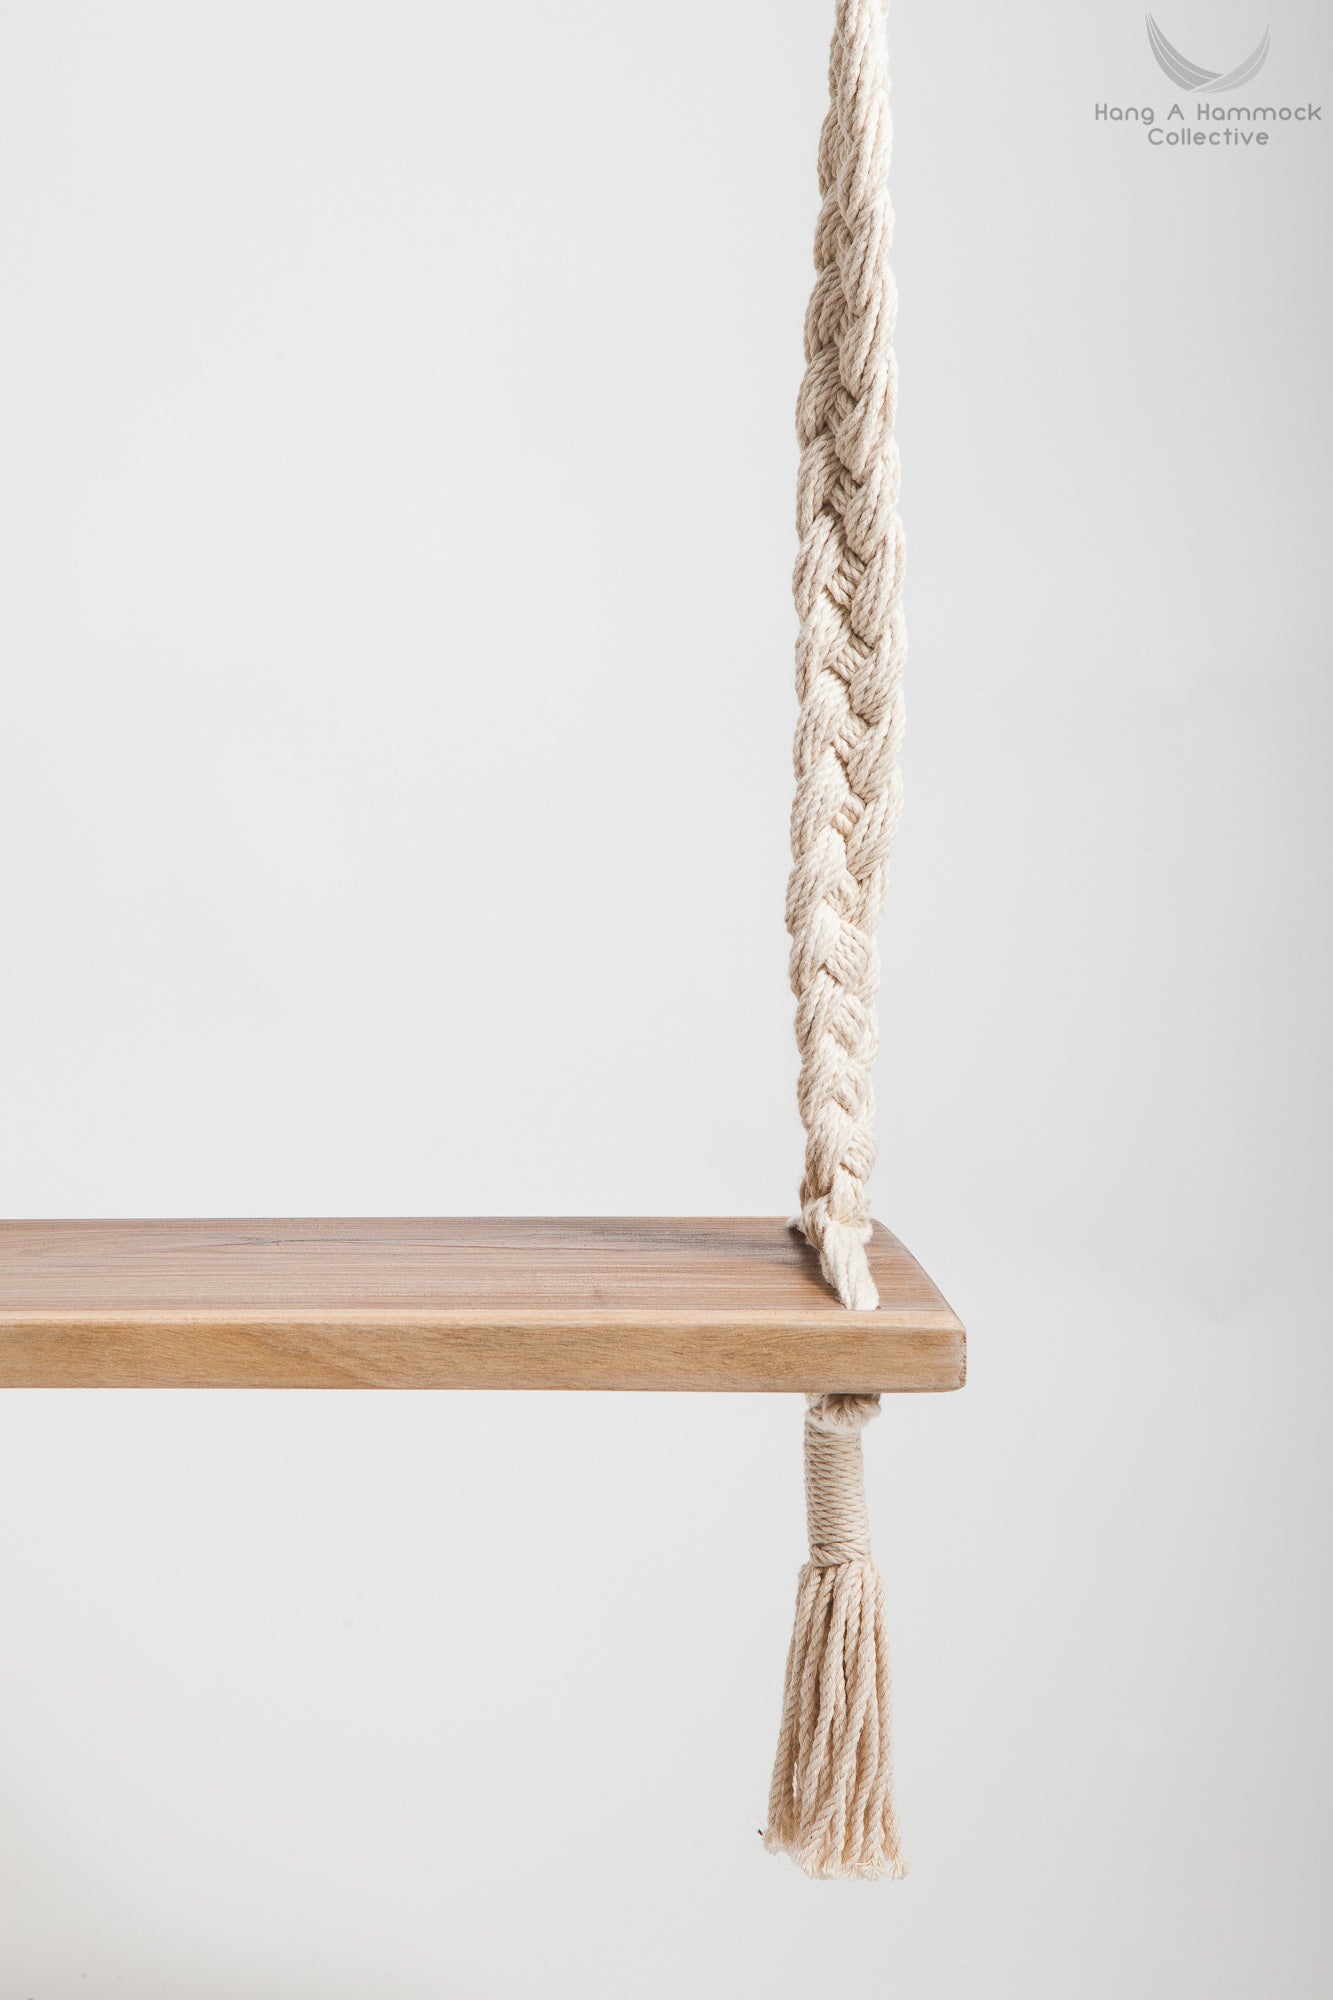 Braided Rope Swing - detail of the timber seat - white backgorund